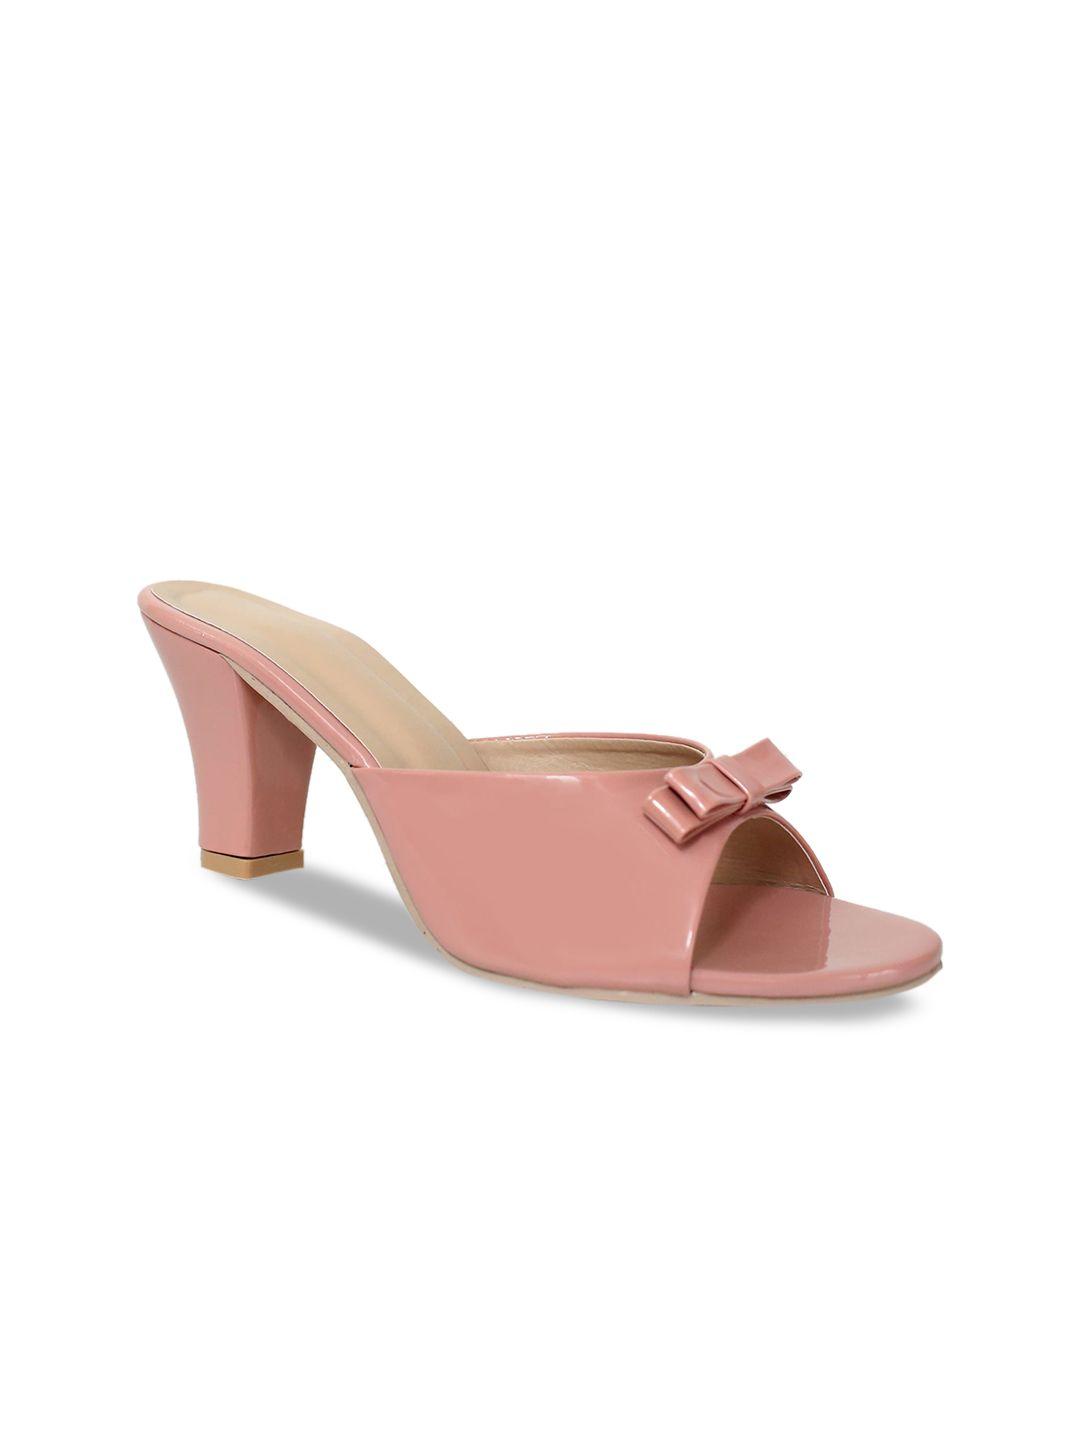 glitzy-galz-peach-coloured-block-peep-toes-with-bows